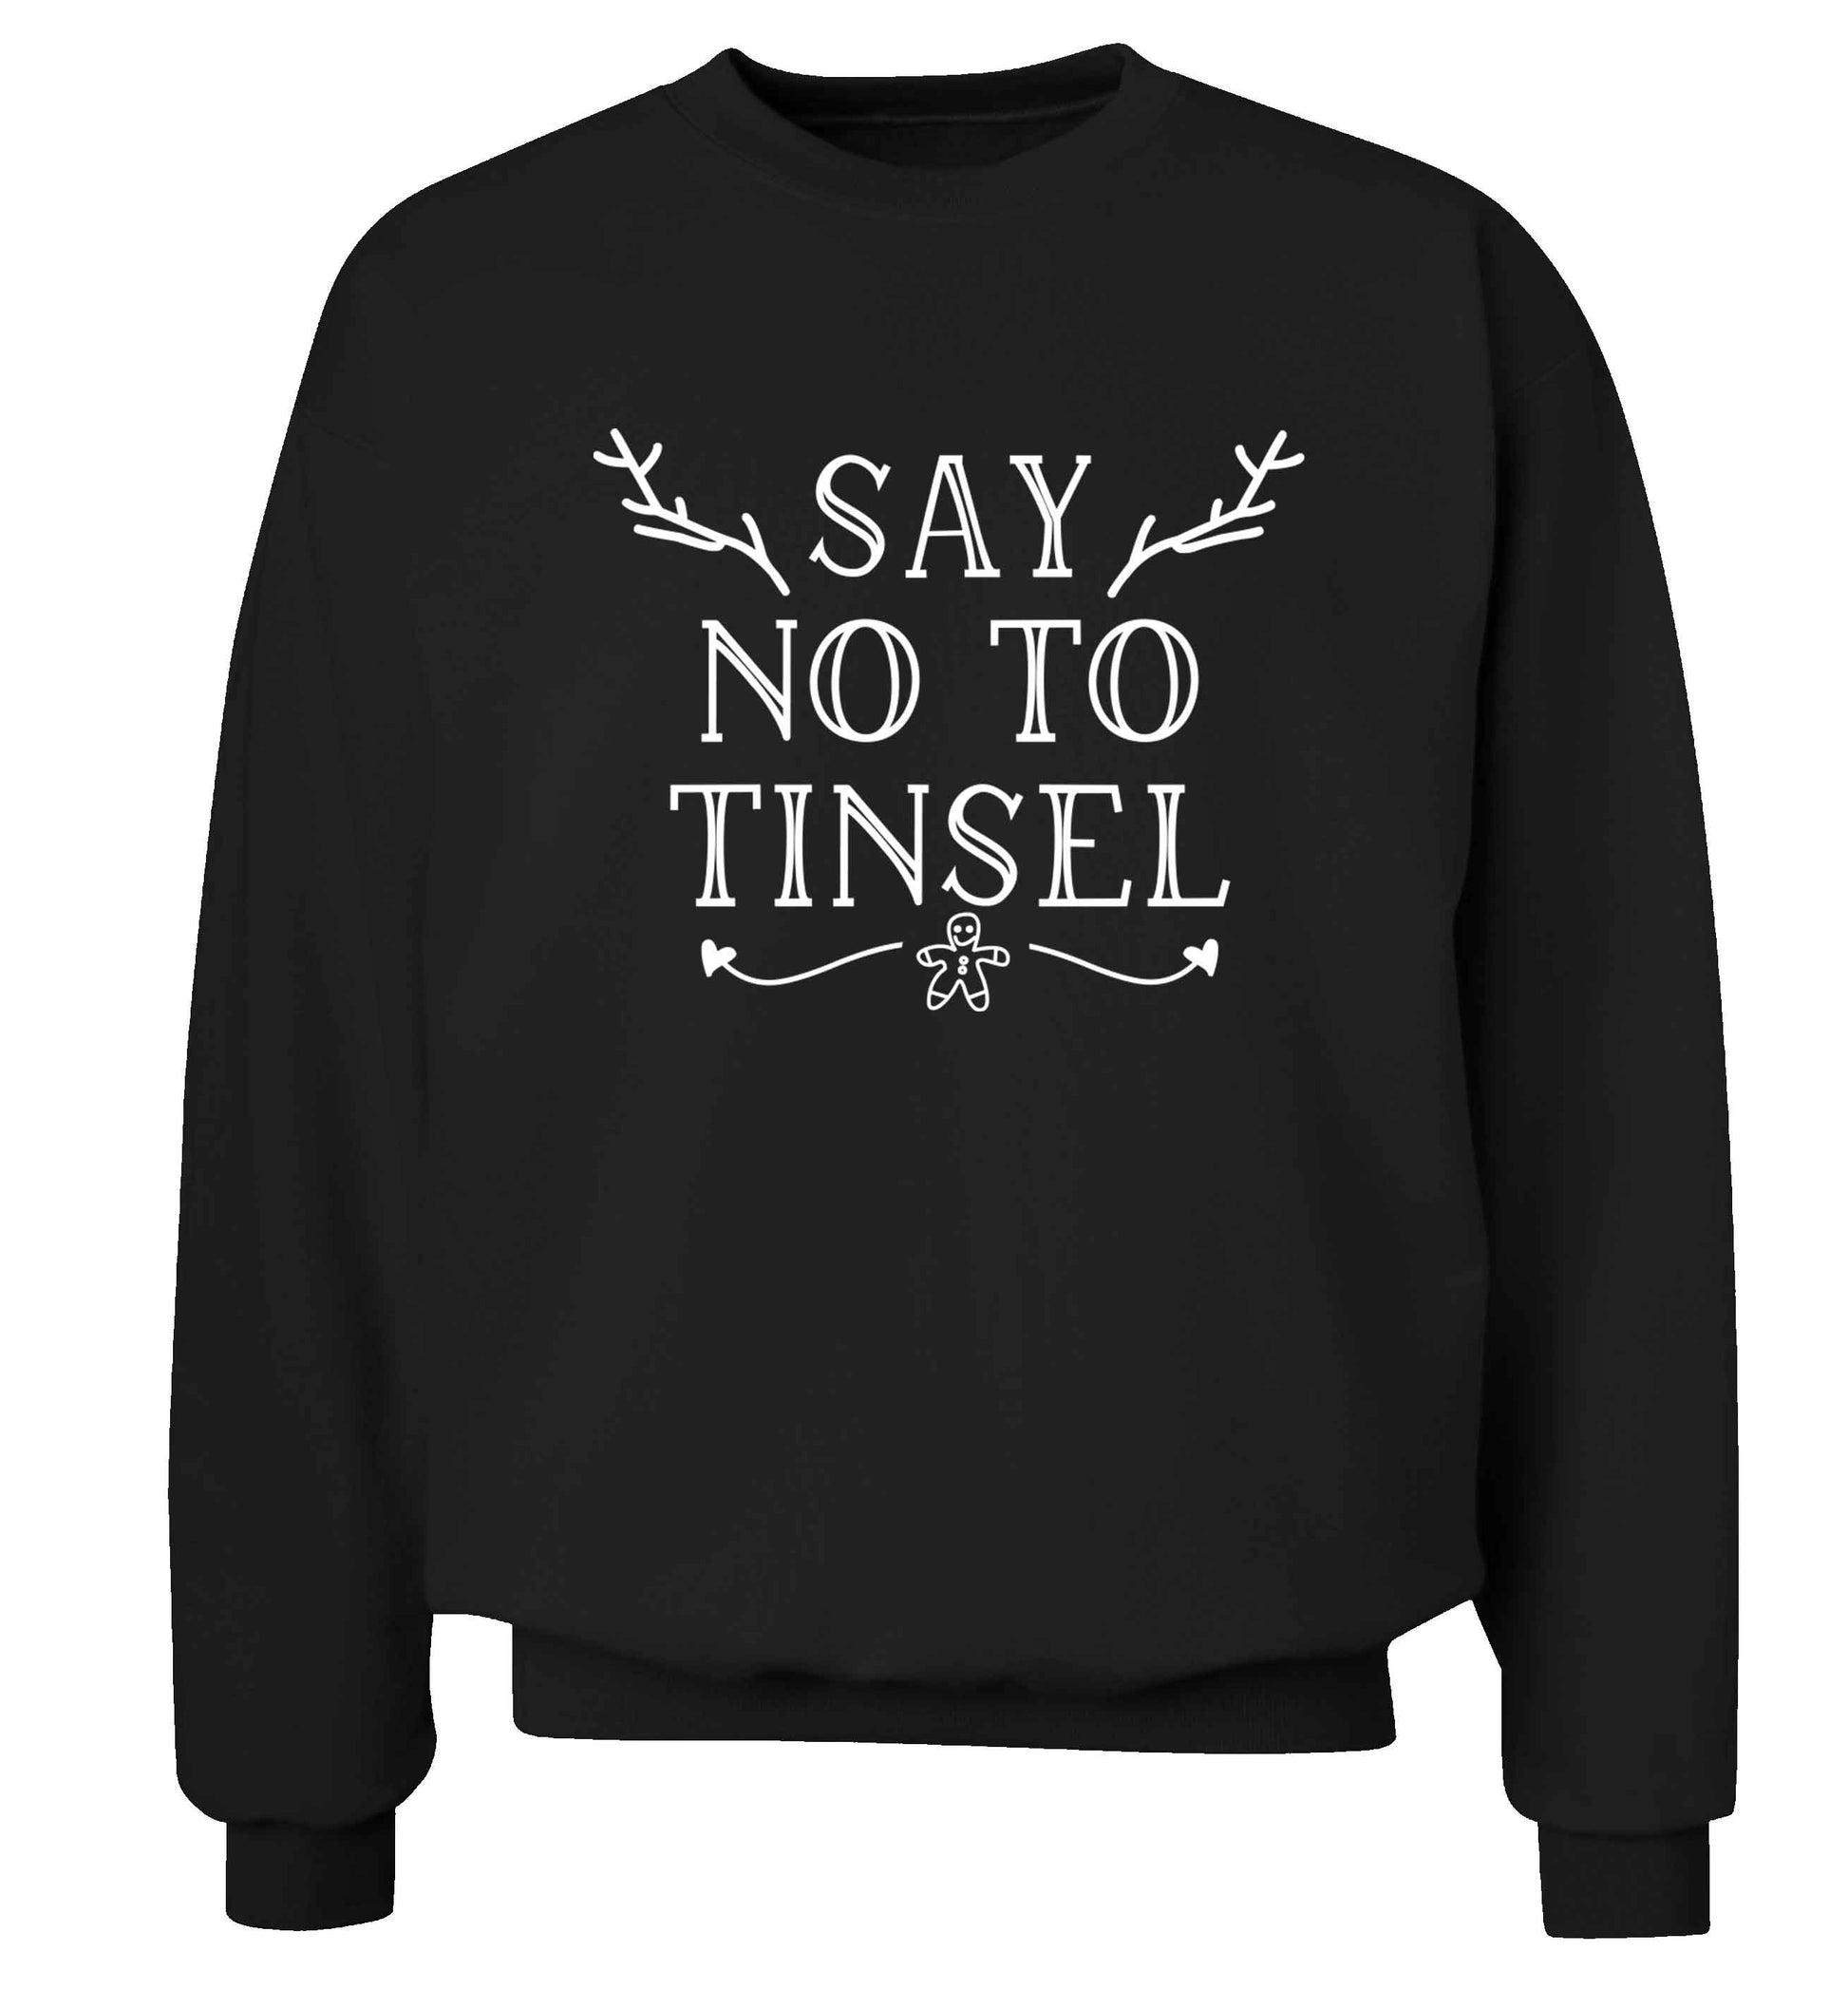 Say no to tinsel Adult's unisex black Sweater 2XL